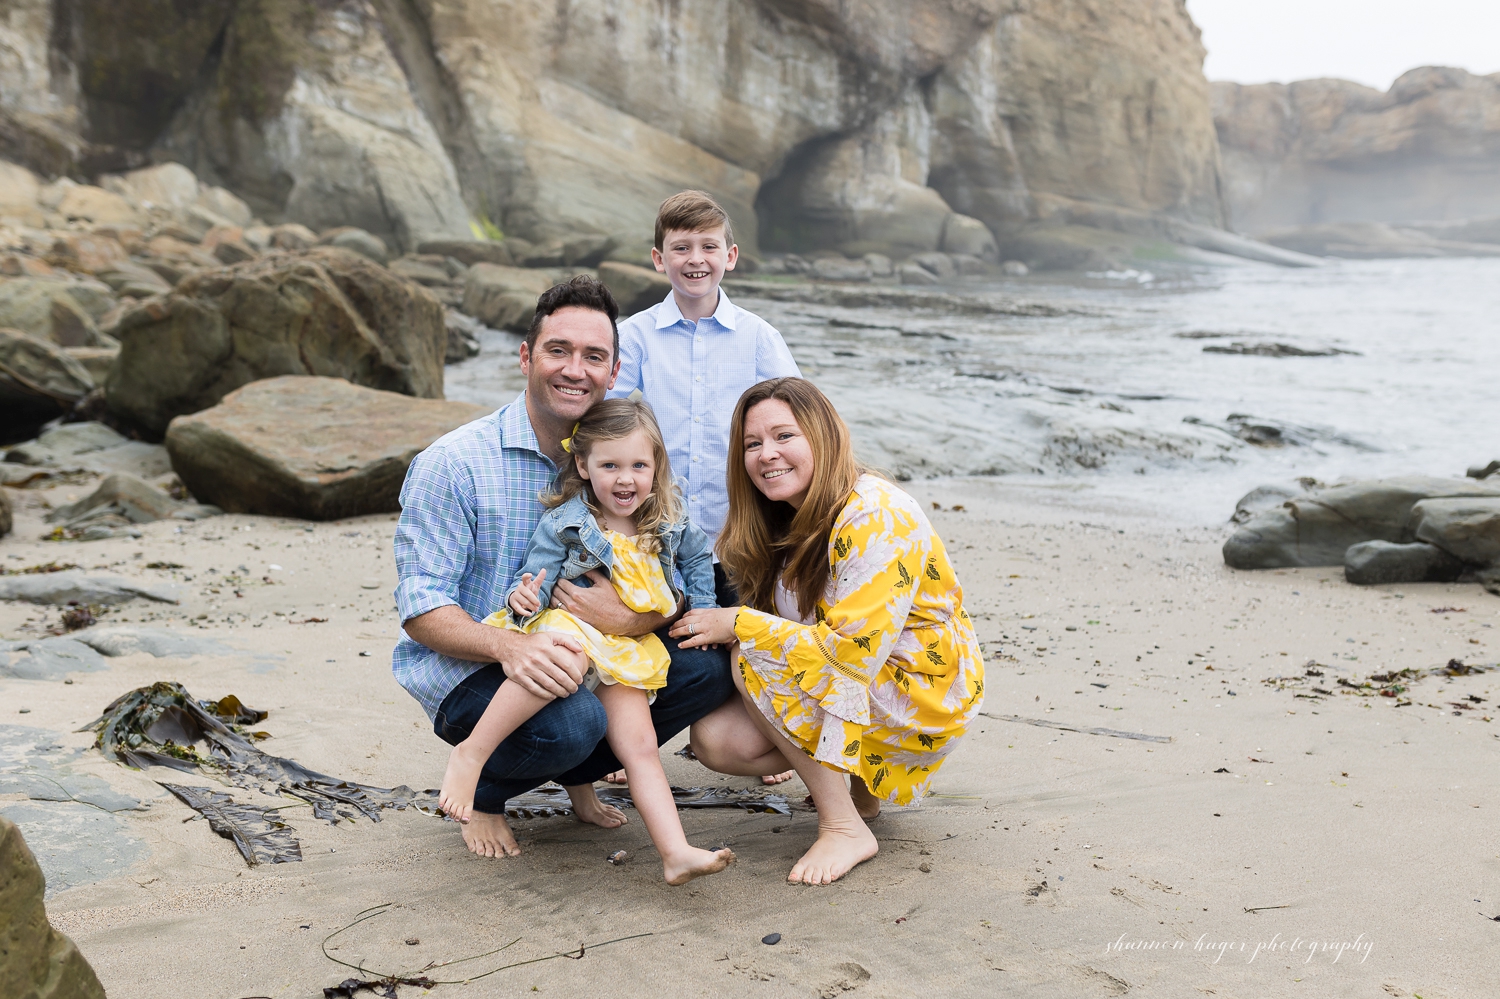 newport oregon coast family photo session by shannon hager photography at devil's punchbowl